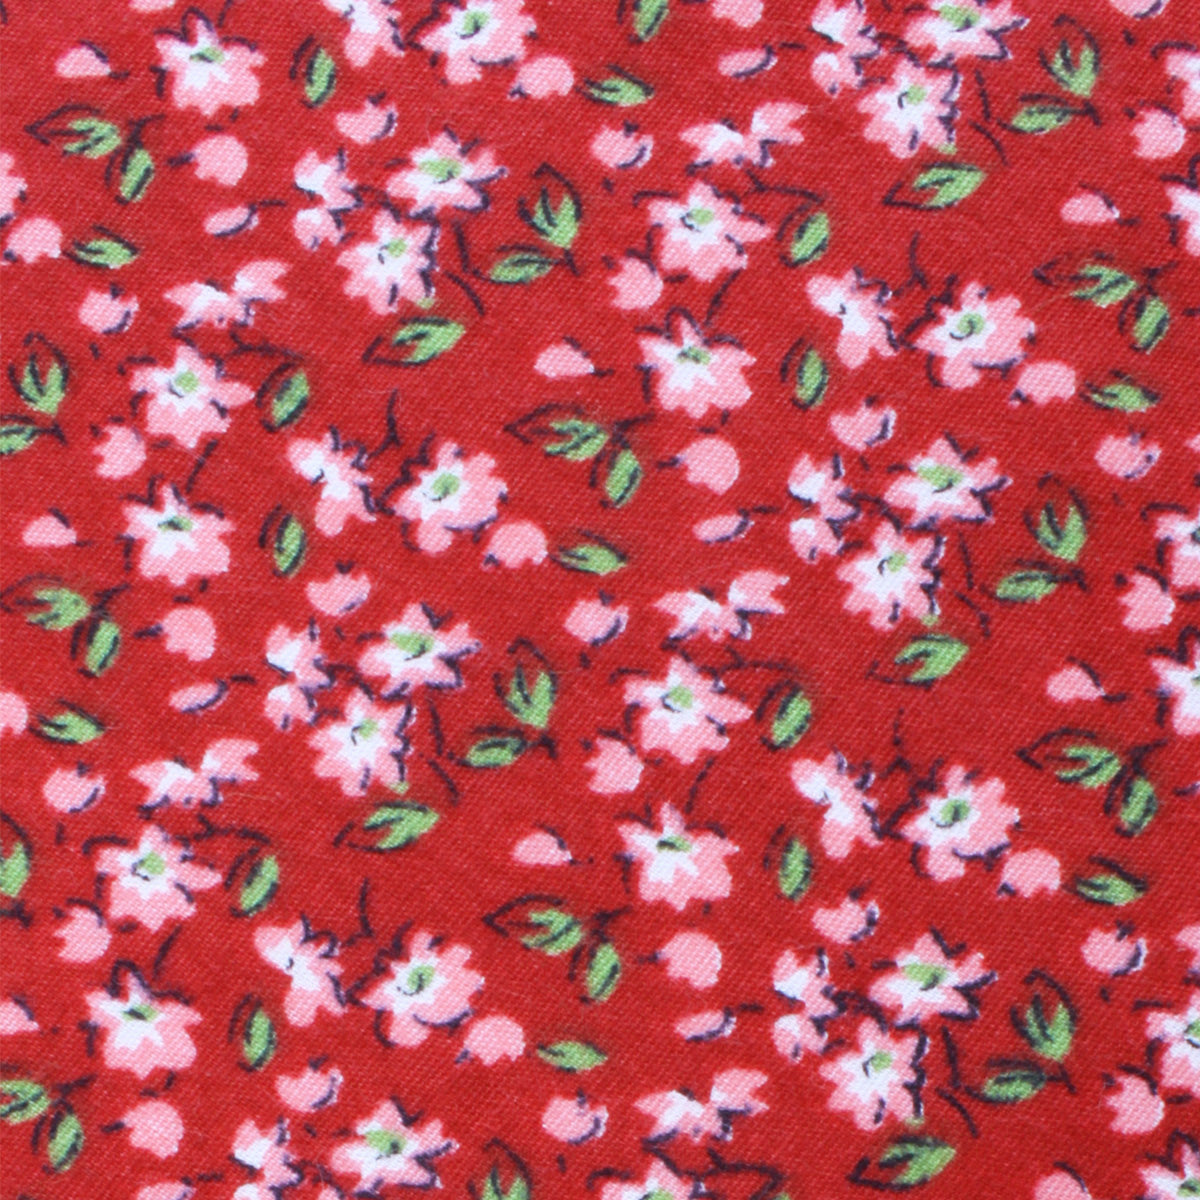 Cano Cristales Scarlet Floral Pocket Square Fabric